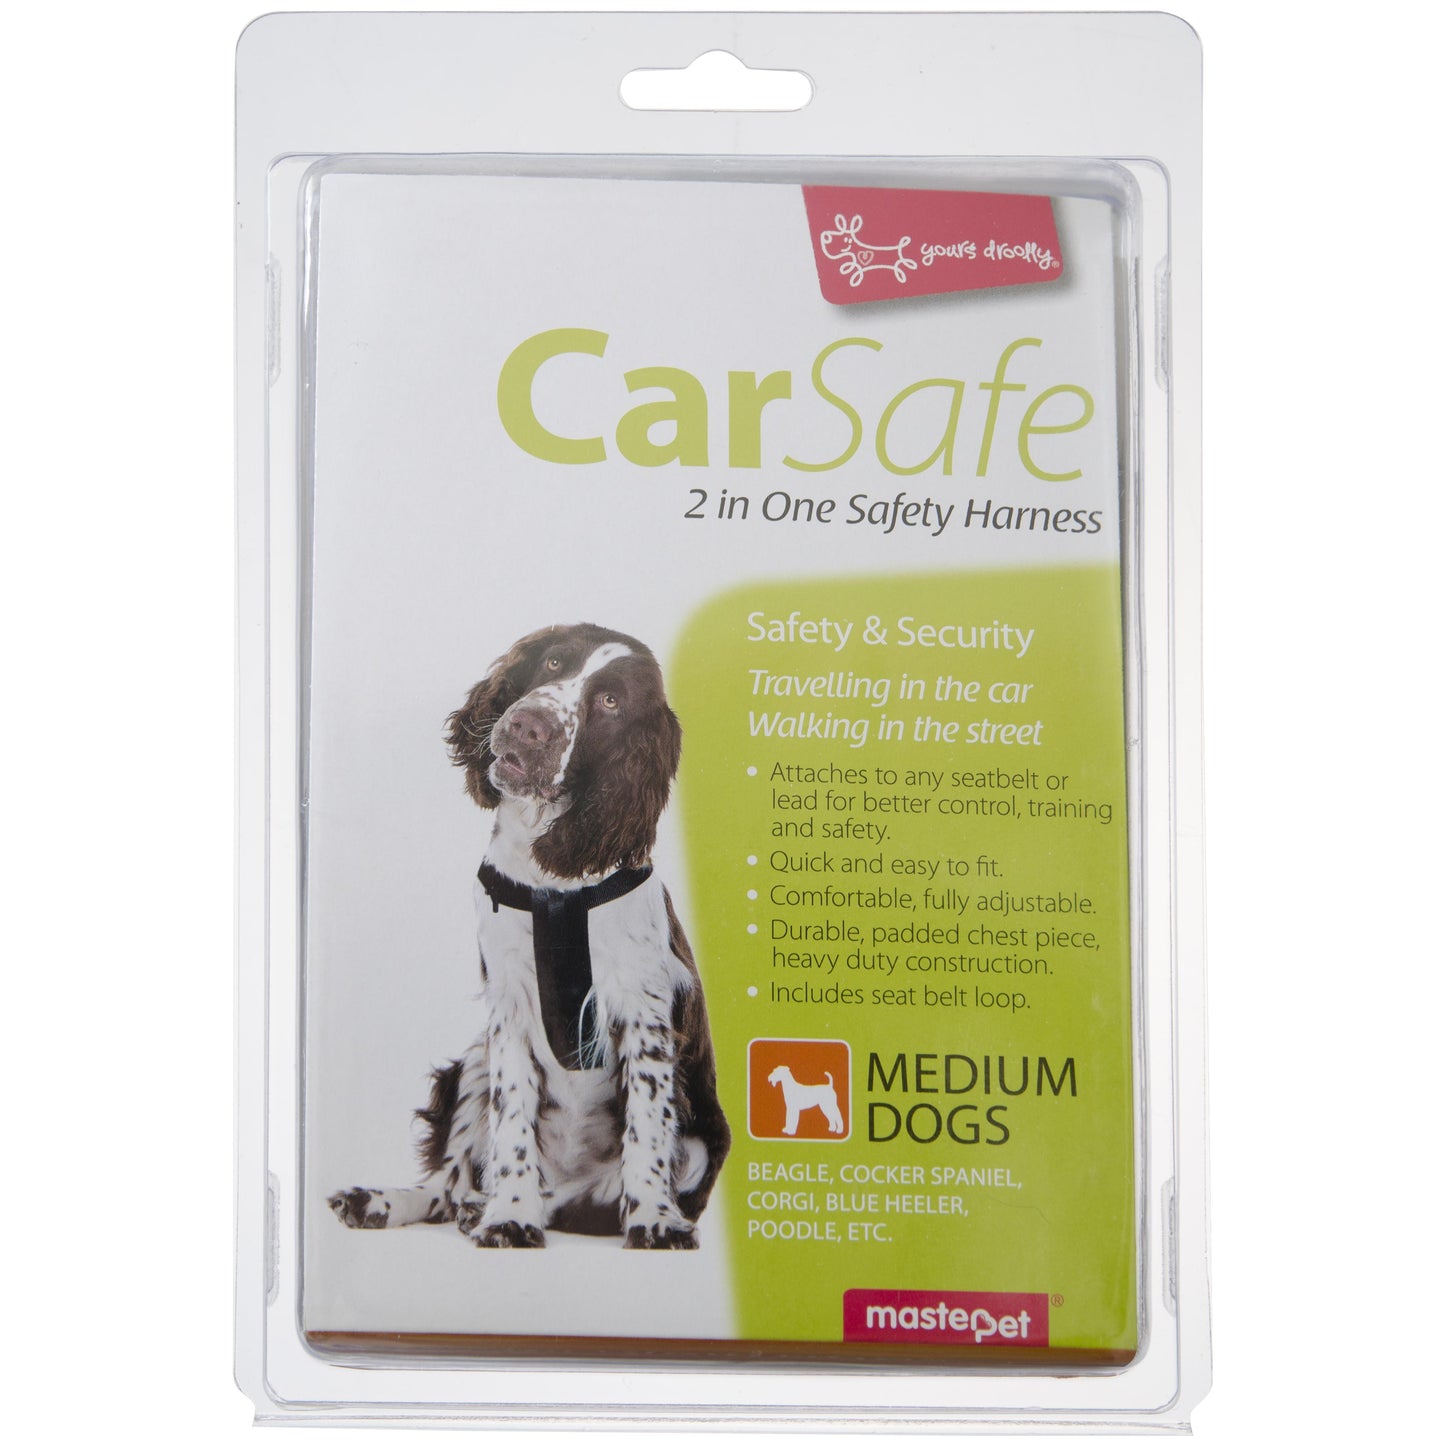 Yours Droolly CarSafe 2 in 1 Car Harness For Dogs